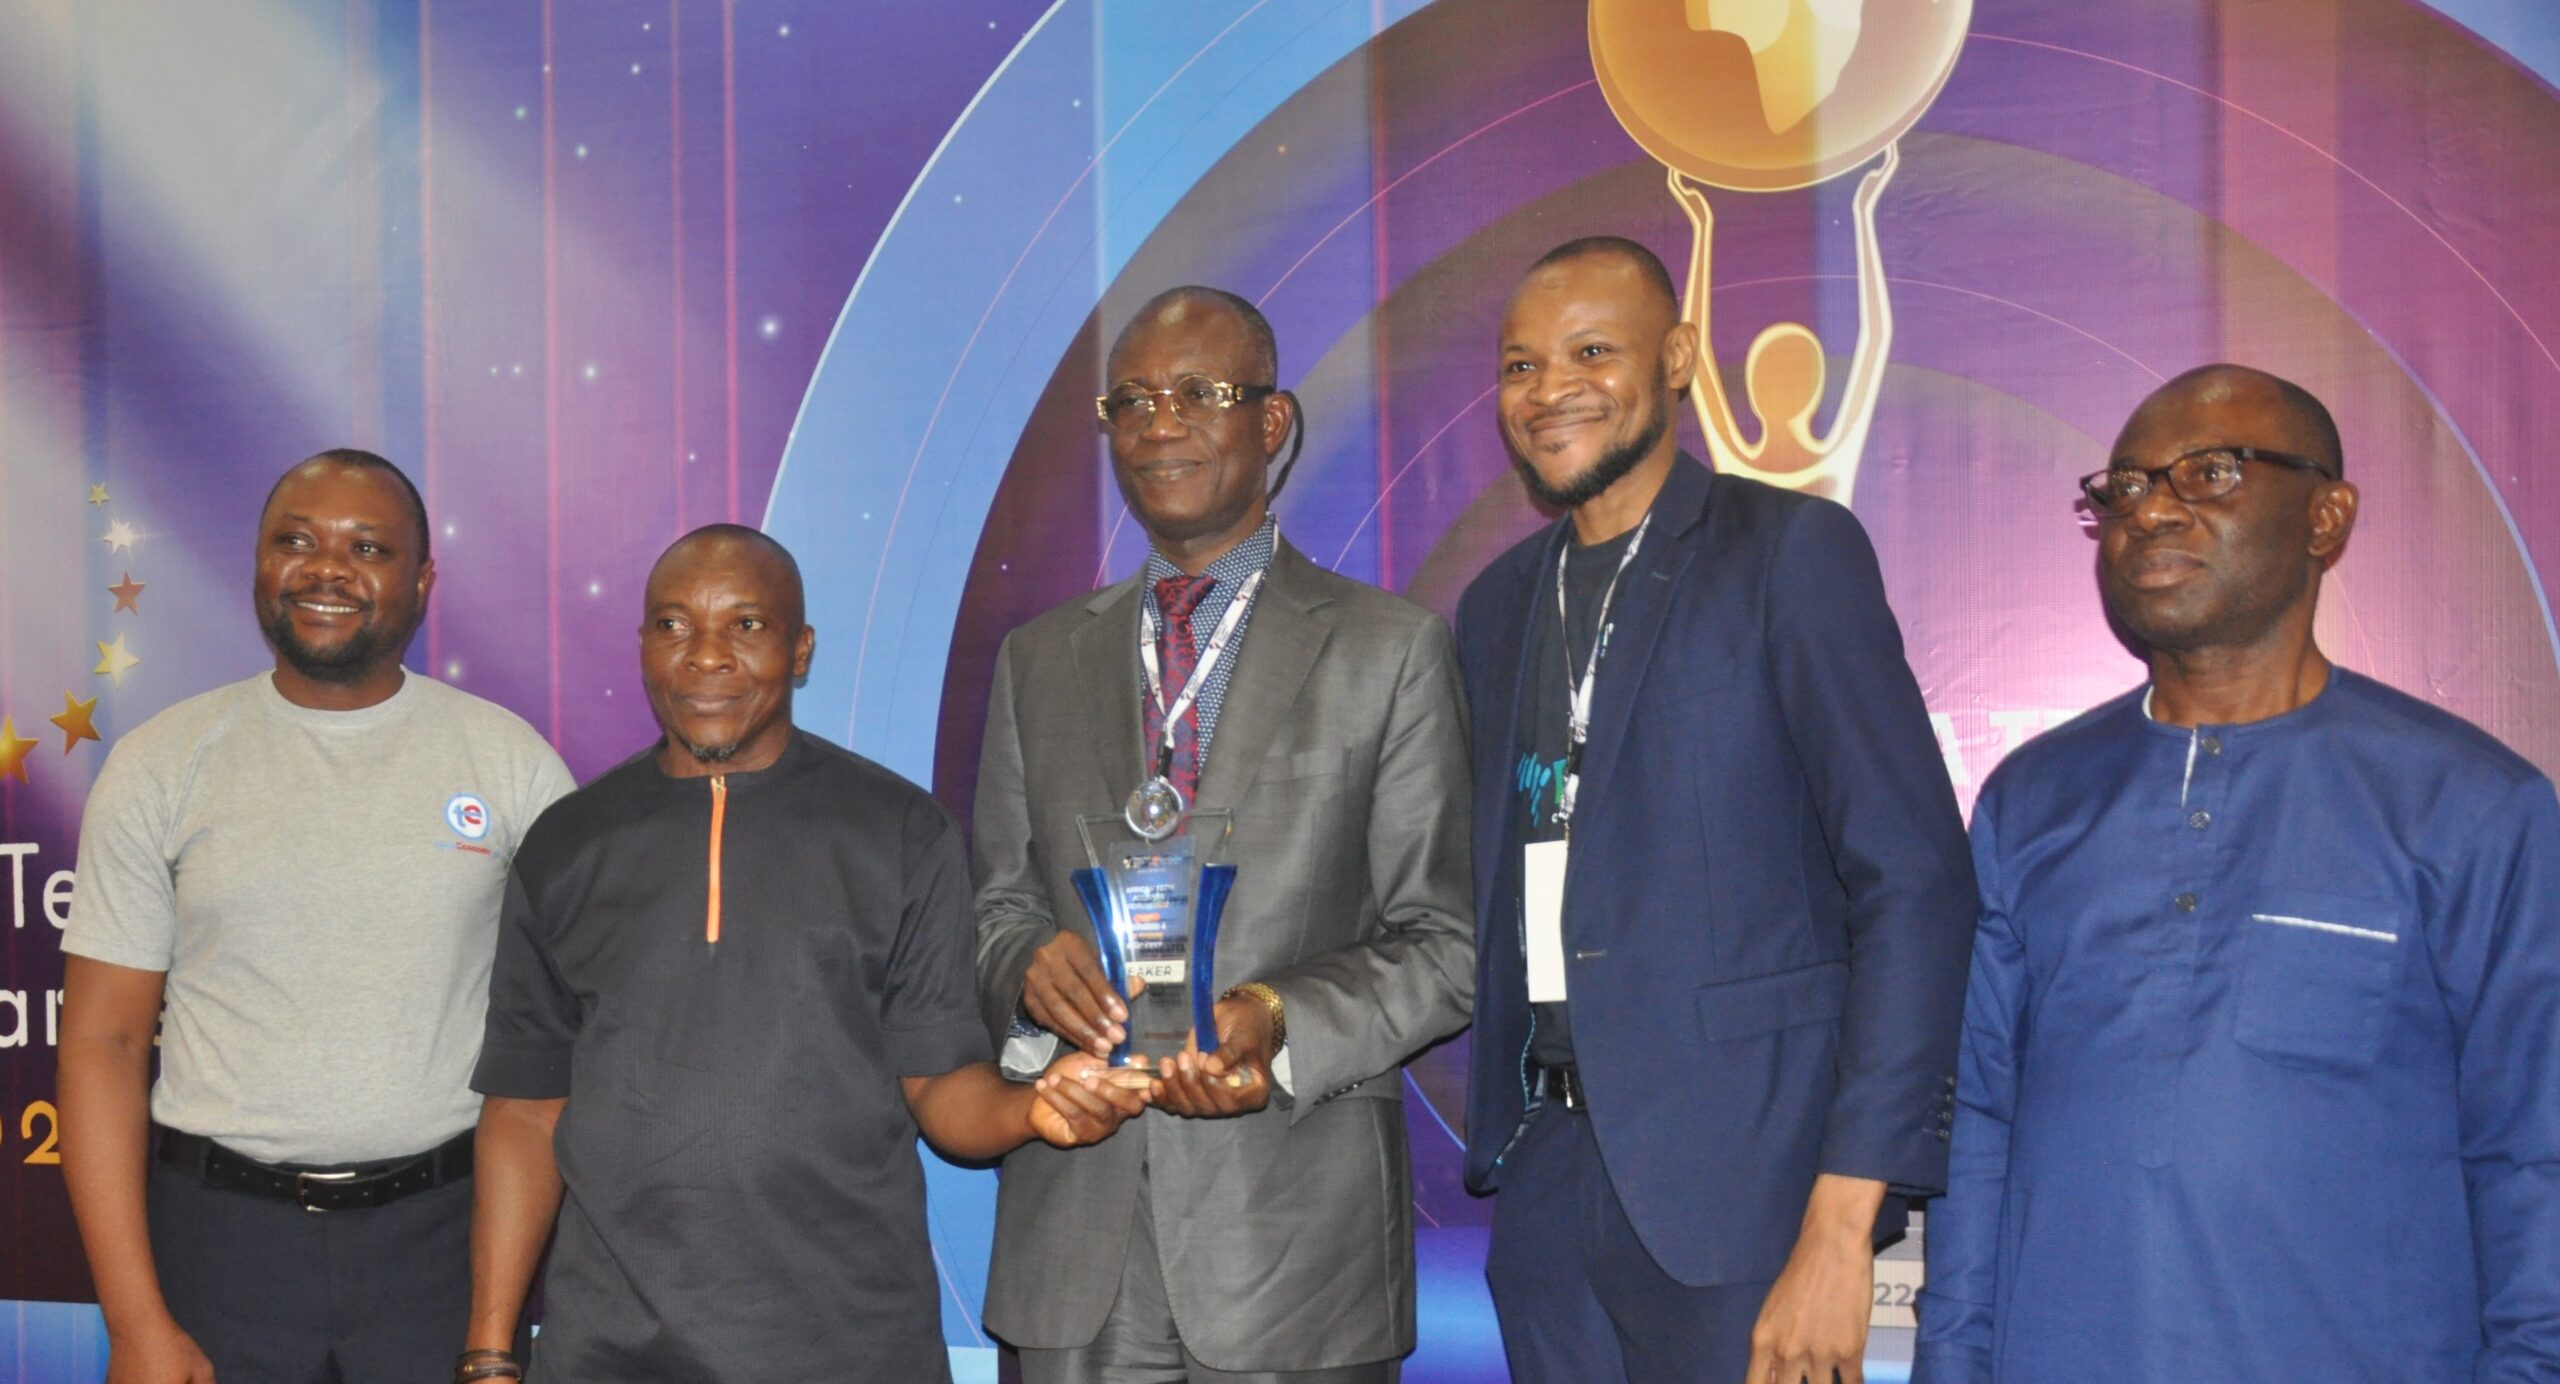 Photo; Nigerian Communications Commission Receives Award Of Excellence At the 2022 AfriTech Forum In Lagos